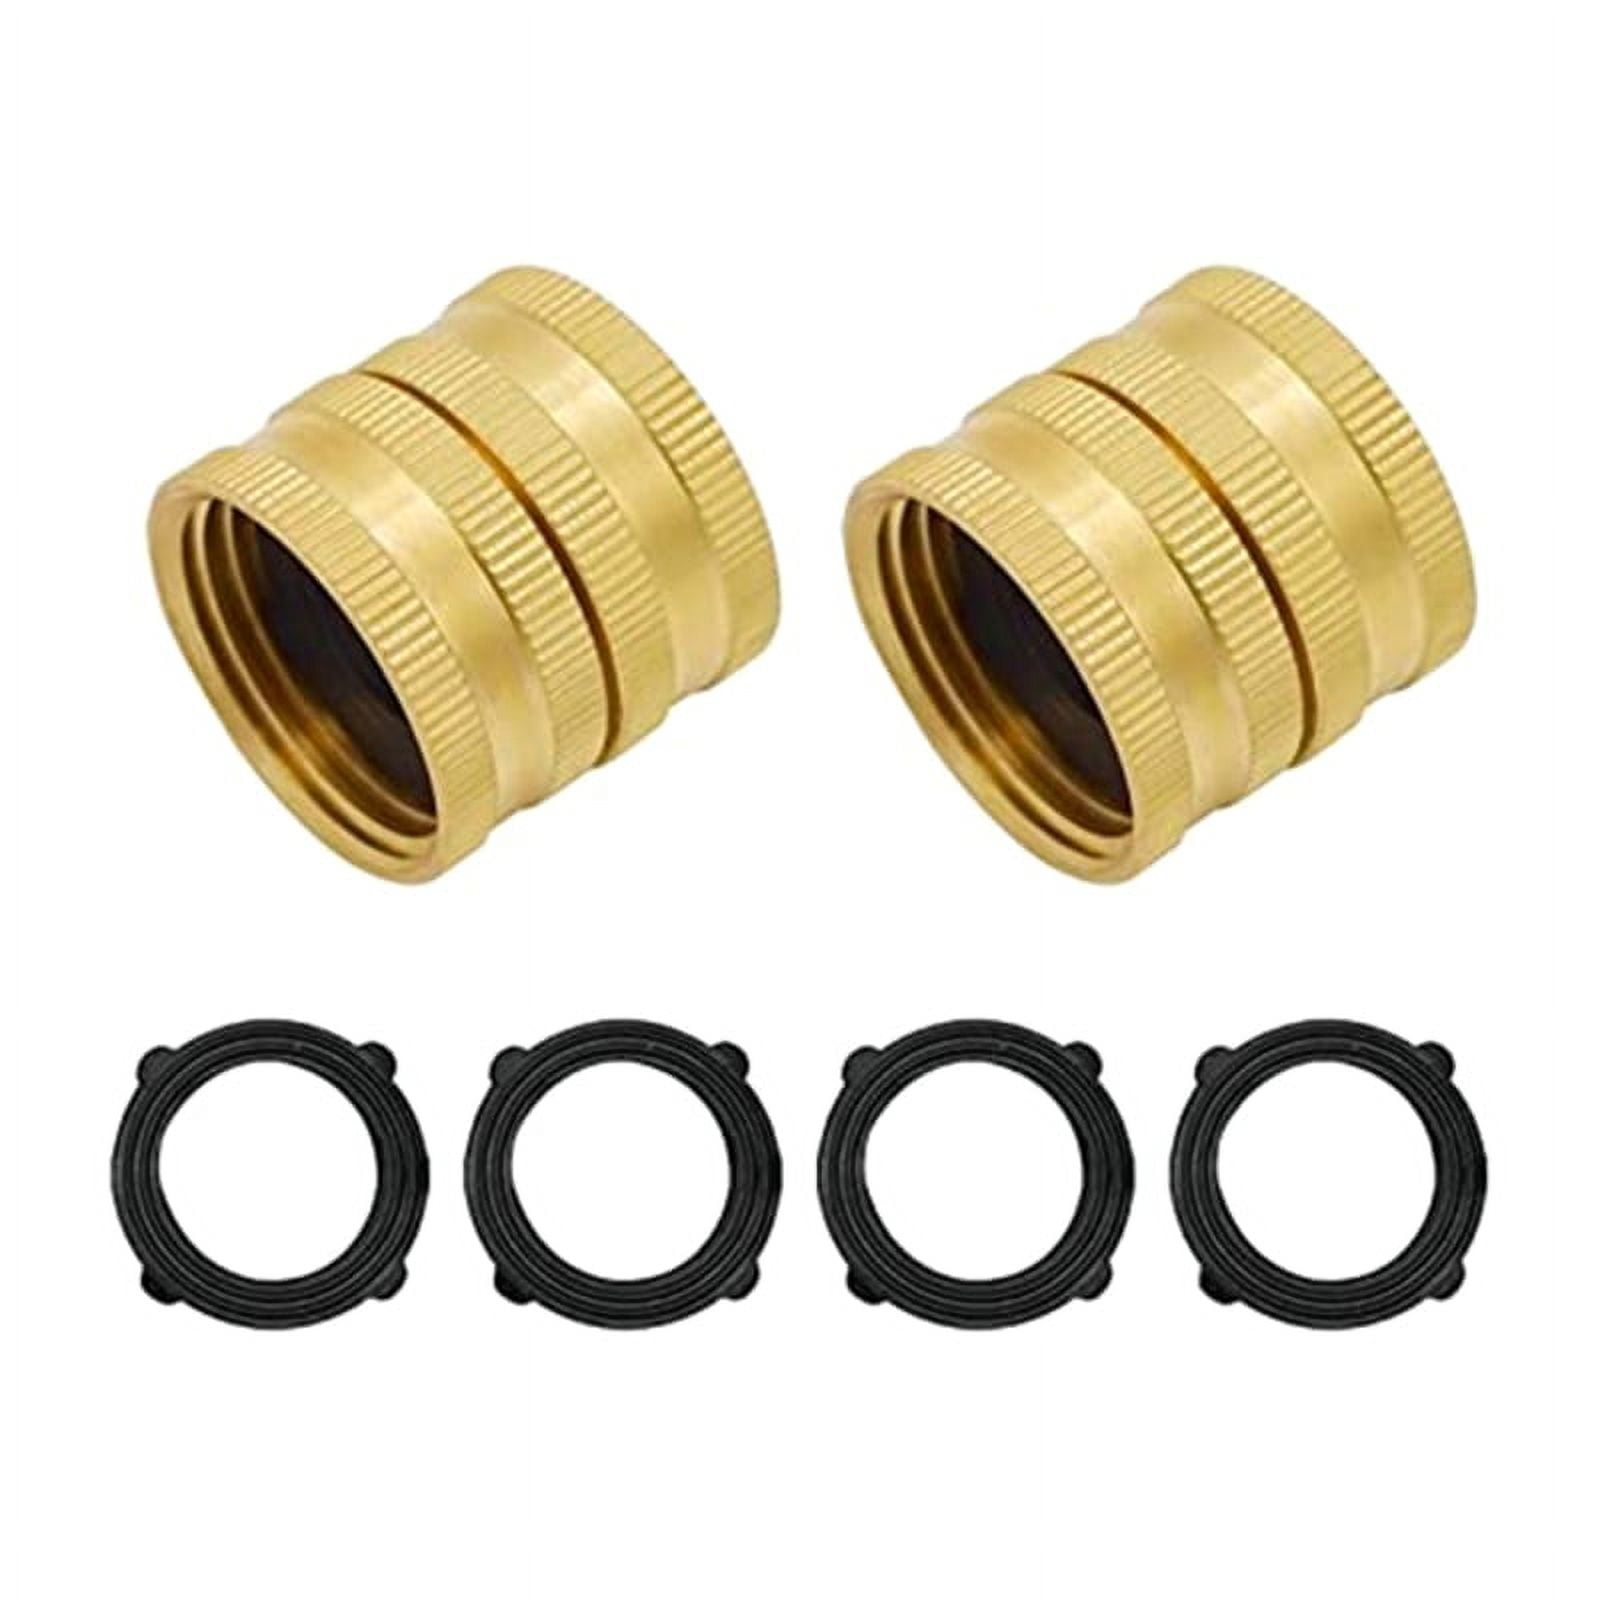 AOOOWER Two-way Female Female Connector Solid Brass Garden Hose